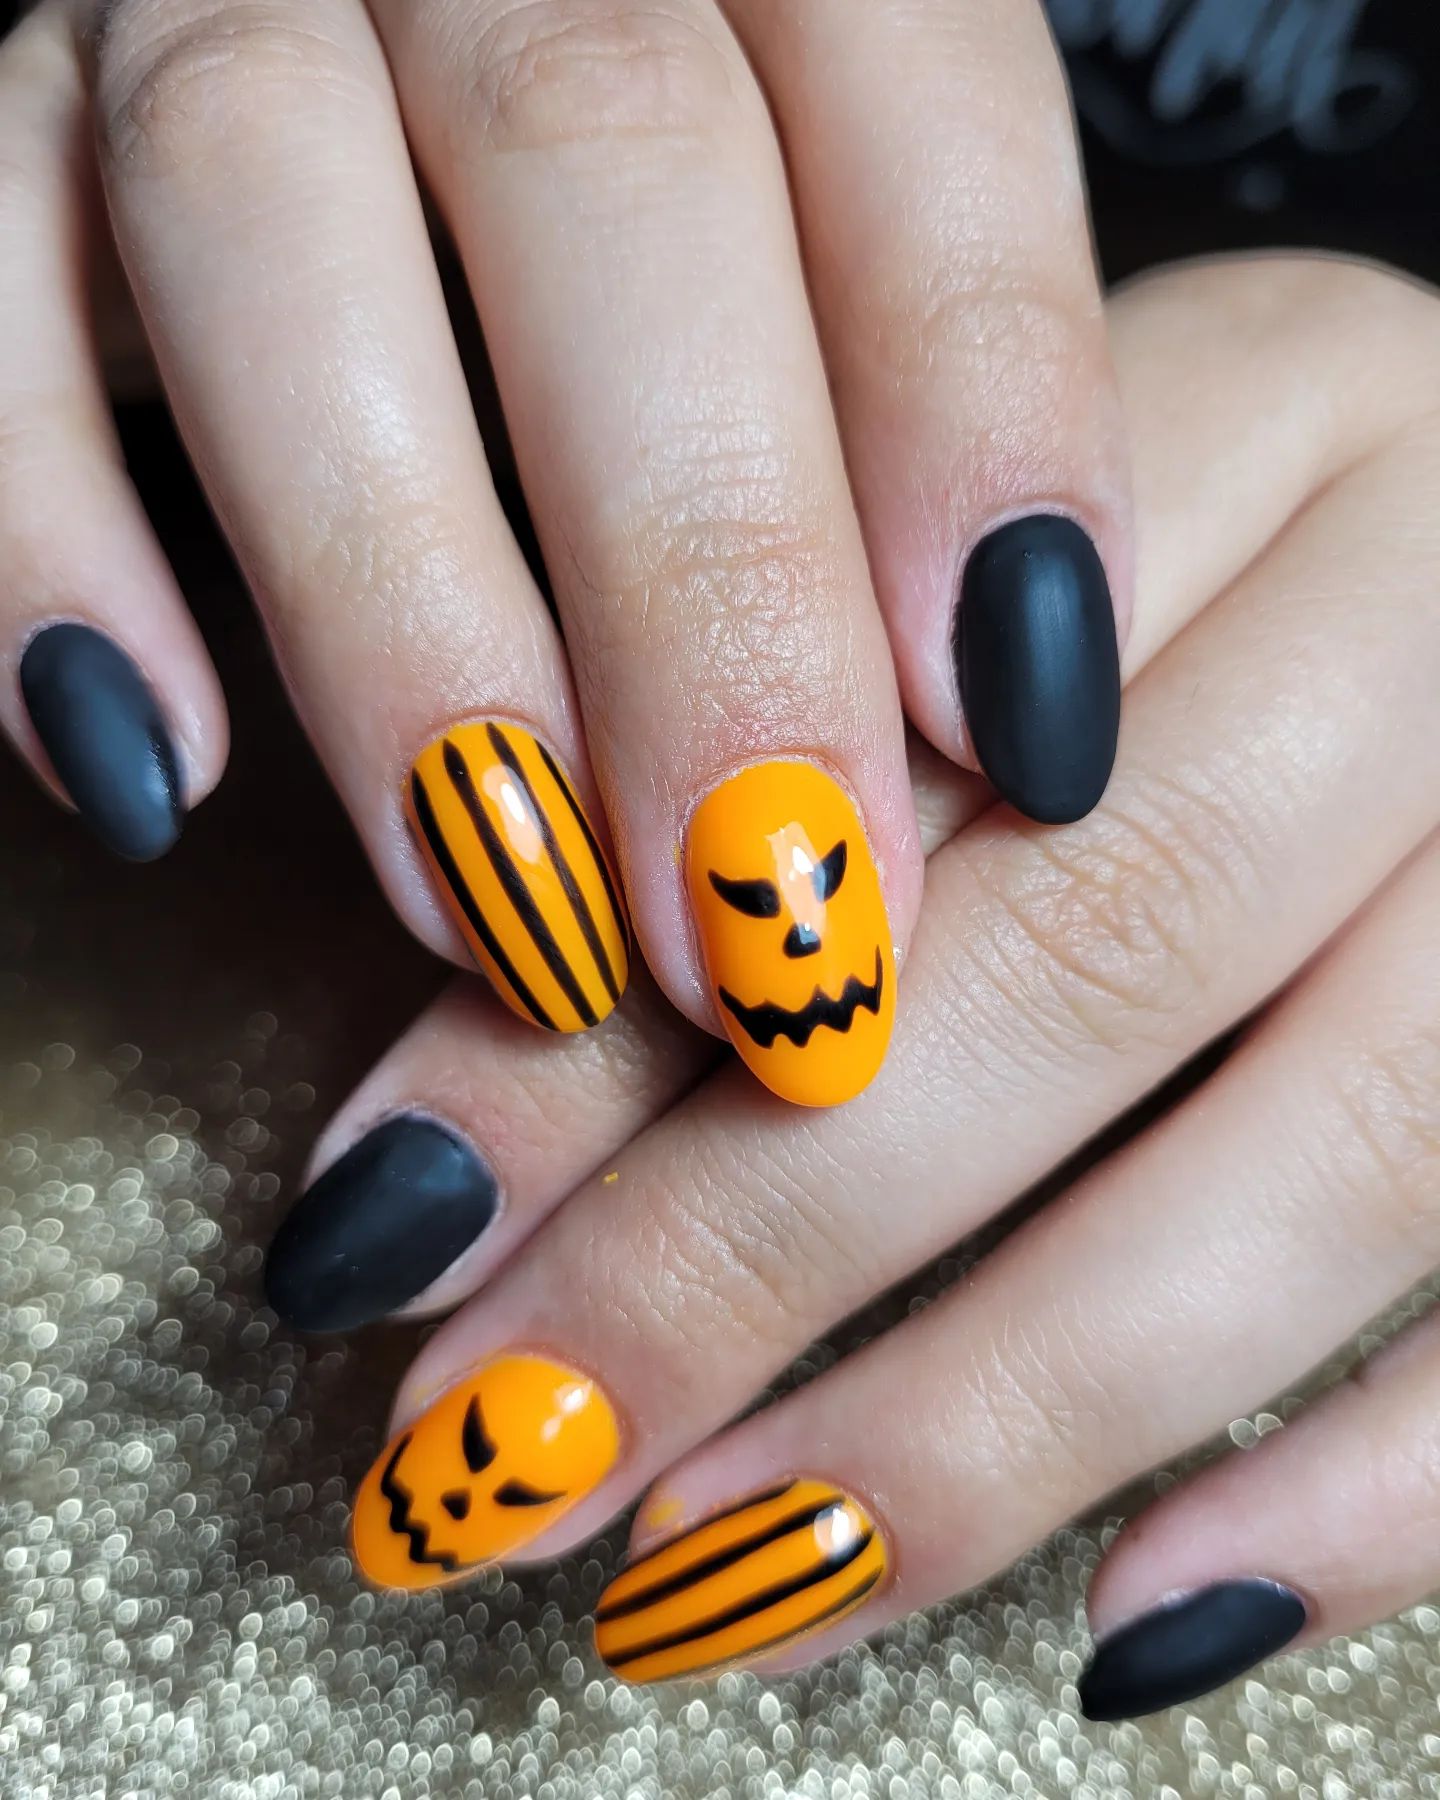 Halloween nail art is the most popular holiday-themed nail art. With this matte black and shiny orange nails, you will get in the spirit of the season quickly. Also, it's pretty easy to do too! Draw black vertical lines for one accent nail and a scary face to the other.